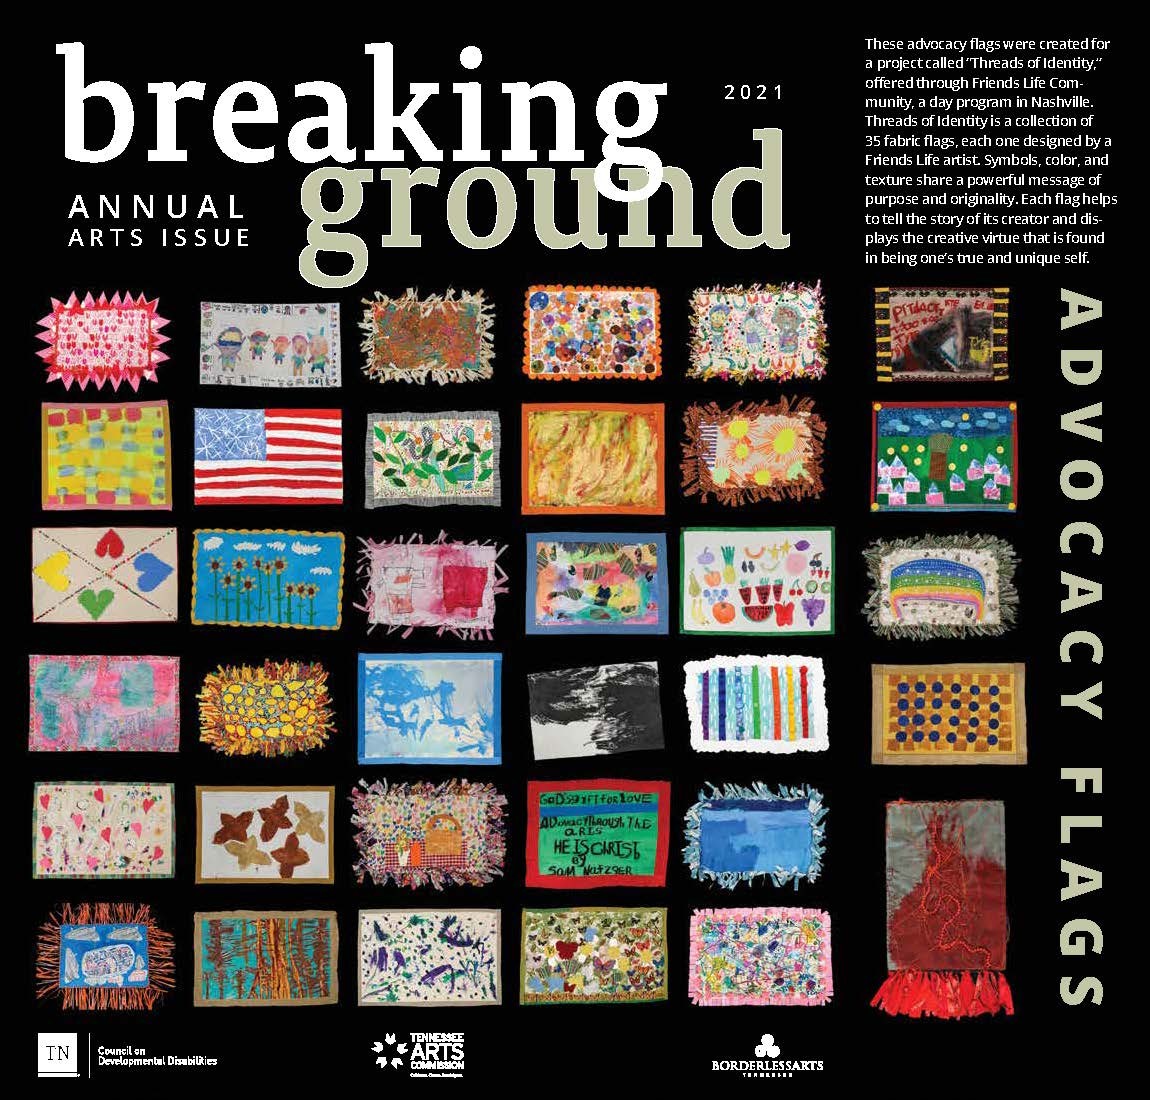 Text on cover – Breaking Ground Annual Arts issue. Logos for the TN Council on Developmental Disabilities, Borderless Arts Tennessee and the TN Arts Commission are at the bottom of the cover. The rest of the cover is filled with small flag images – 35 of them, including ones on an expanded inside cover. The description of this work on the inside cover flap reads: “These advocacy flags were created for a project called “Threads of Identity,” offered through Friends Life Community, a day program in Nashville. Threads of Identity is a collection of 35 fabric flags, each one designed by a Friends Life artist. Symbols, color, and texture share a powerful message of purpose and originality. Each flag helps to tell the story of its creator and displays the creative virtue that is found ground in being one’s true and unique self.” The flags are all sorts of colors and patterns; some are abstract and some show specific animals or people or places. On the other side of the expanded cover flap, the 35 artists names are listed by their flag image.